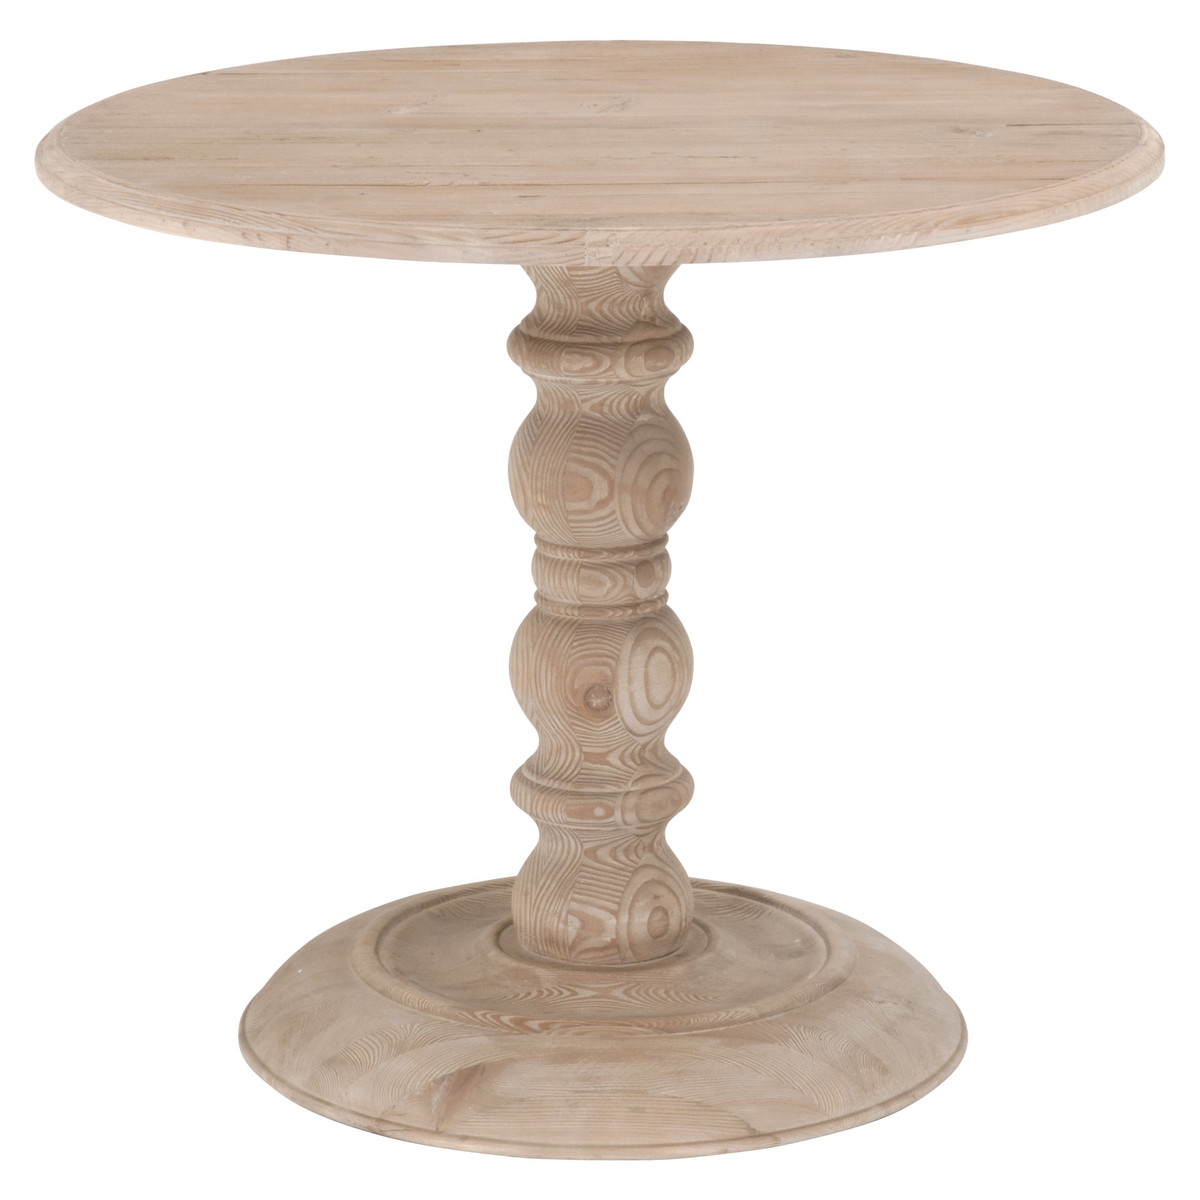 CHELSEA 36" ROUND DINING TABLE - Image 0